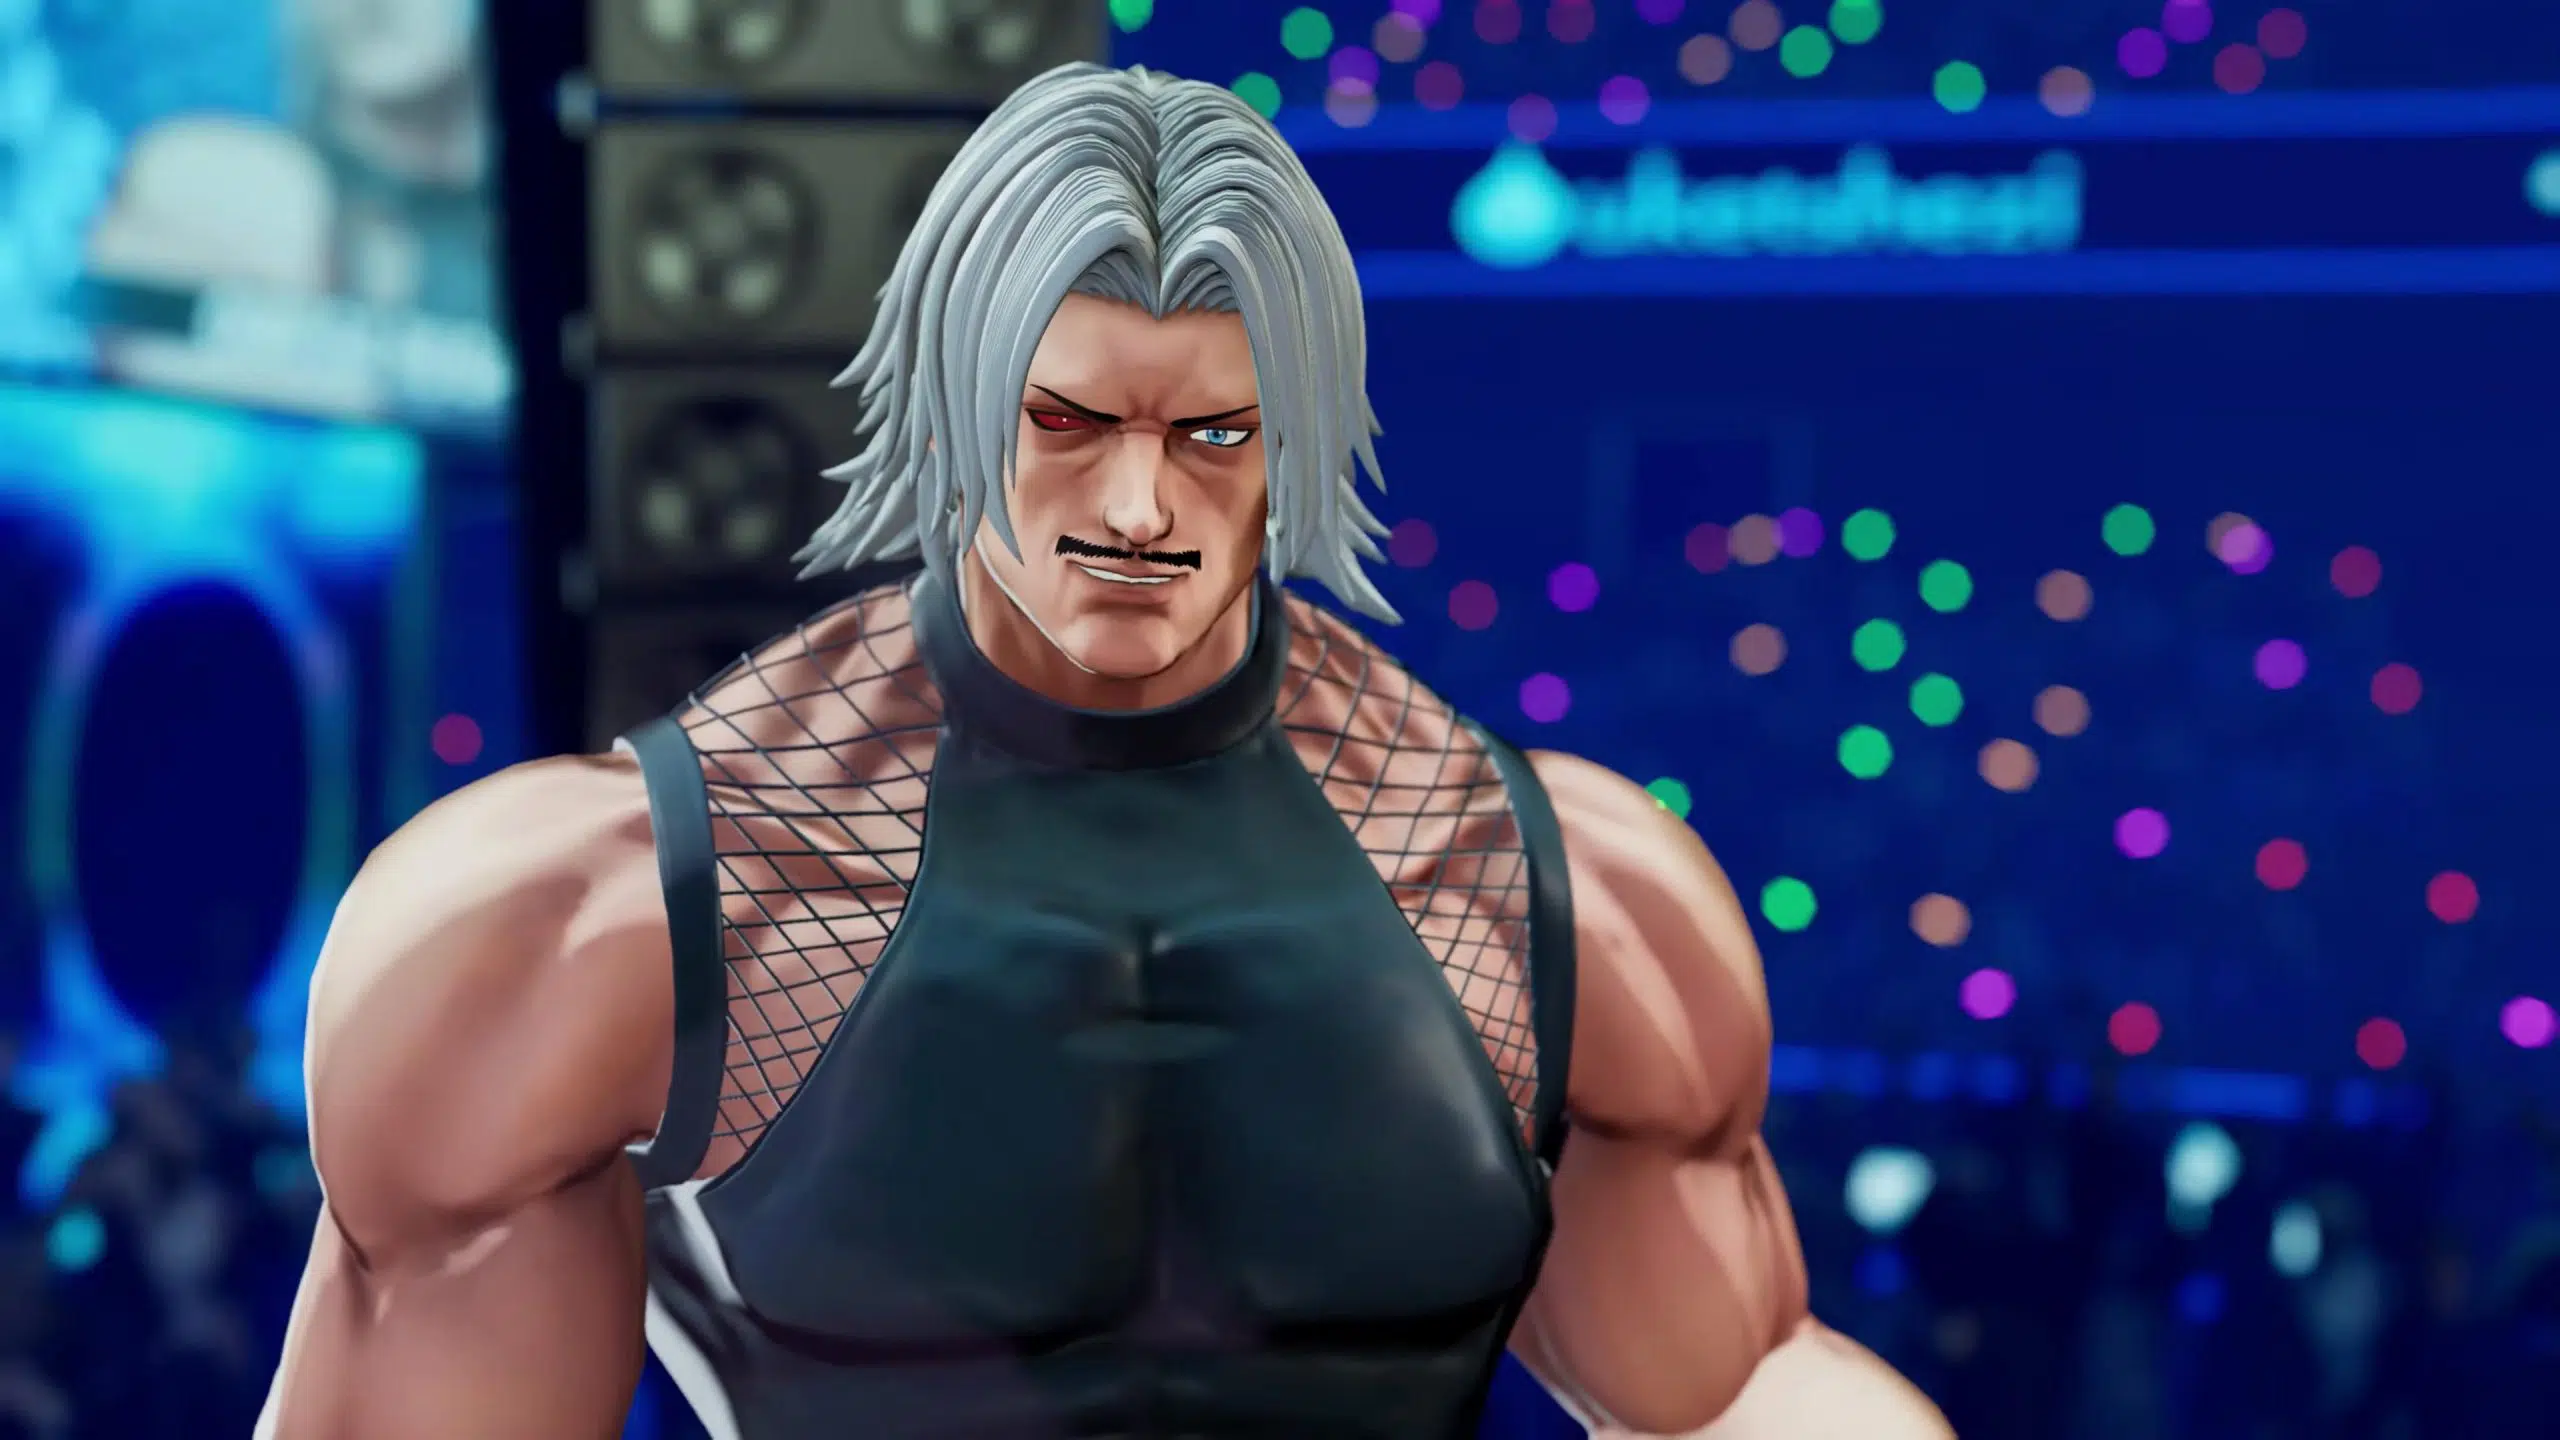 king of fighters 15 update 1.20